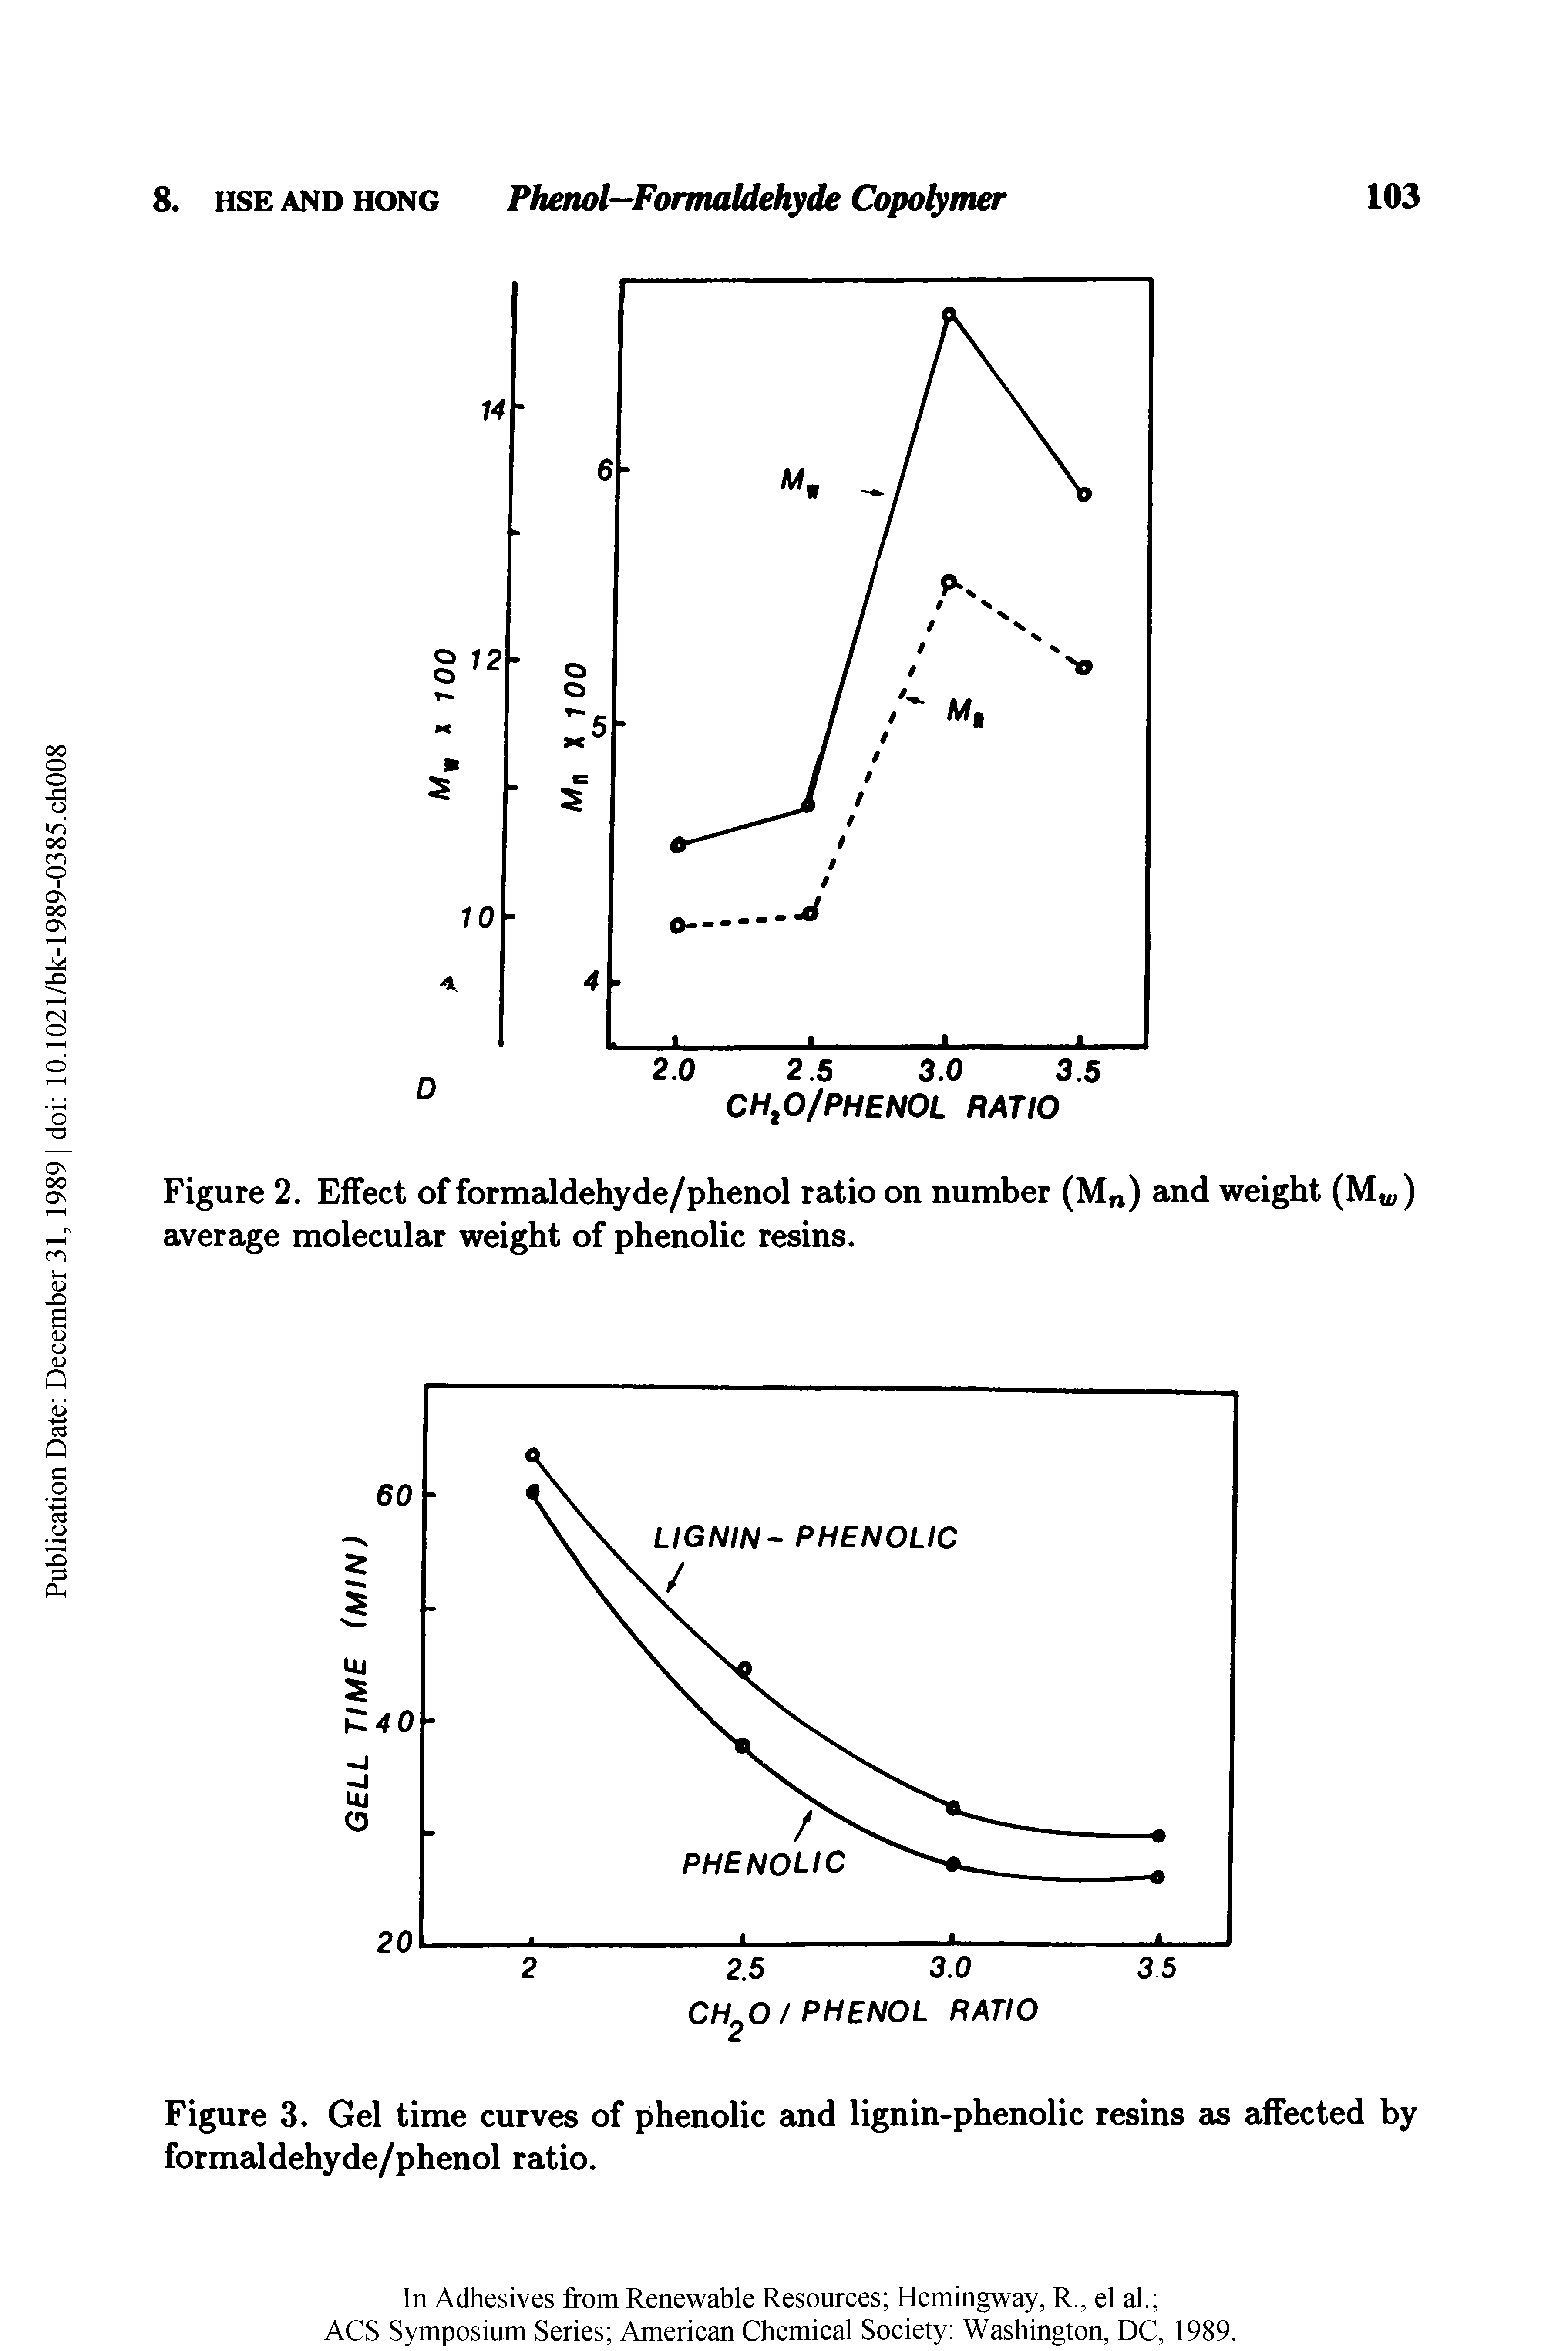 Figure 3. Gel time curves of phenolic and lignin-phenolic resins as affected by formaldehyde/phenol ratio.